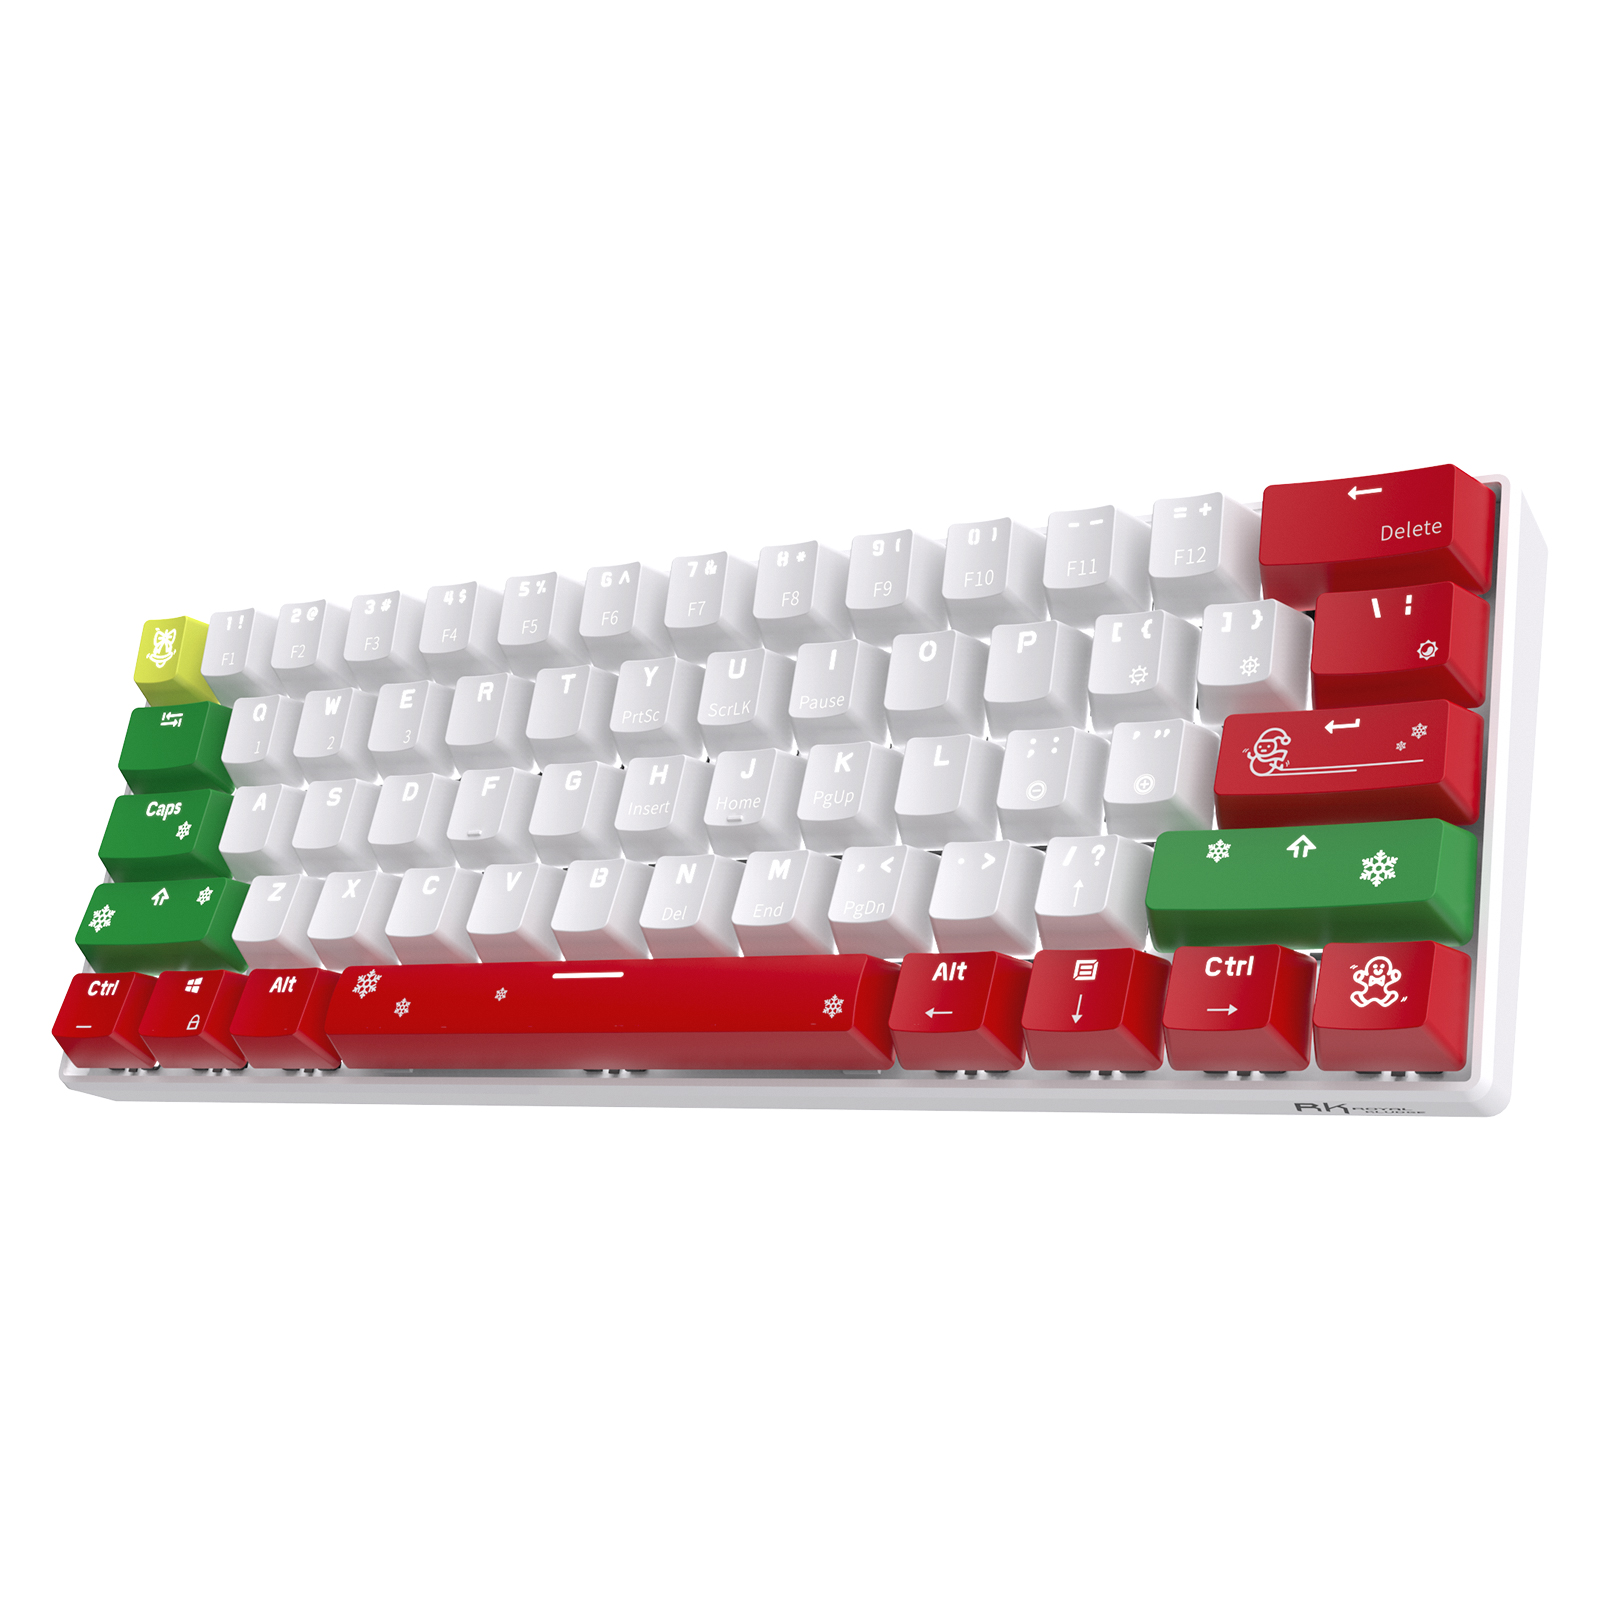 RK ROYAL KLUDGE RK61 Wireless 60% Mechanical Gaming Keyboard, Red Switch, Christmas Version